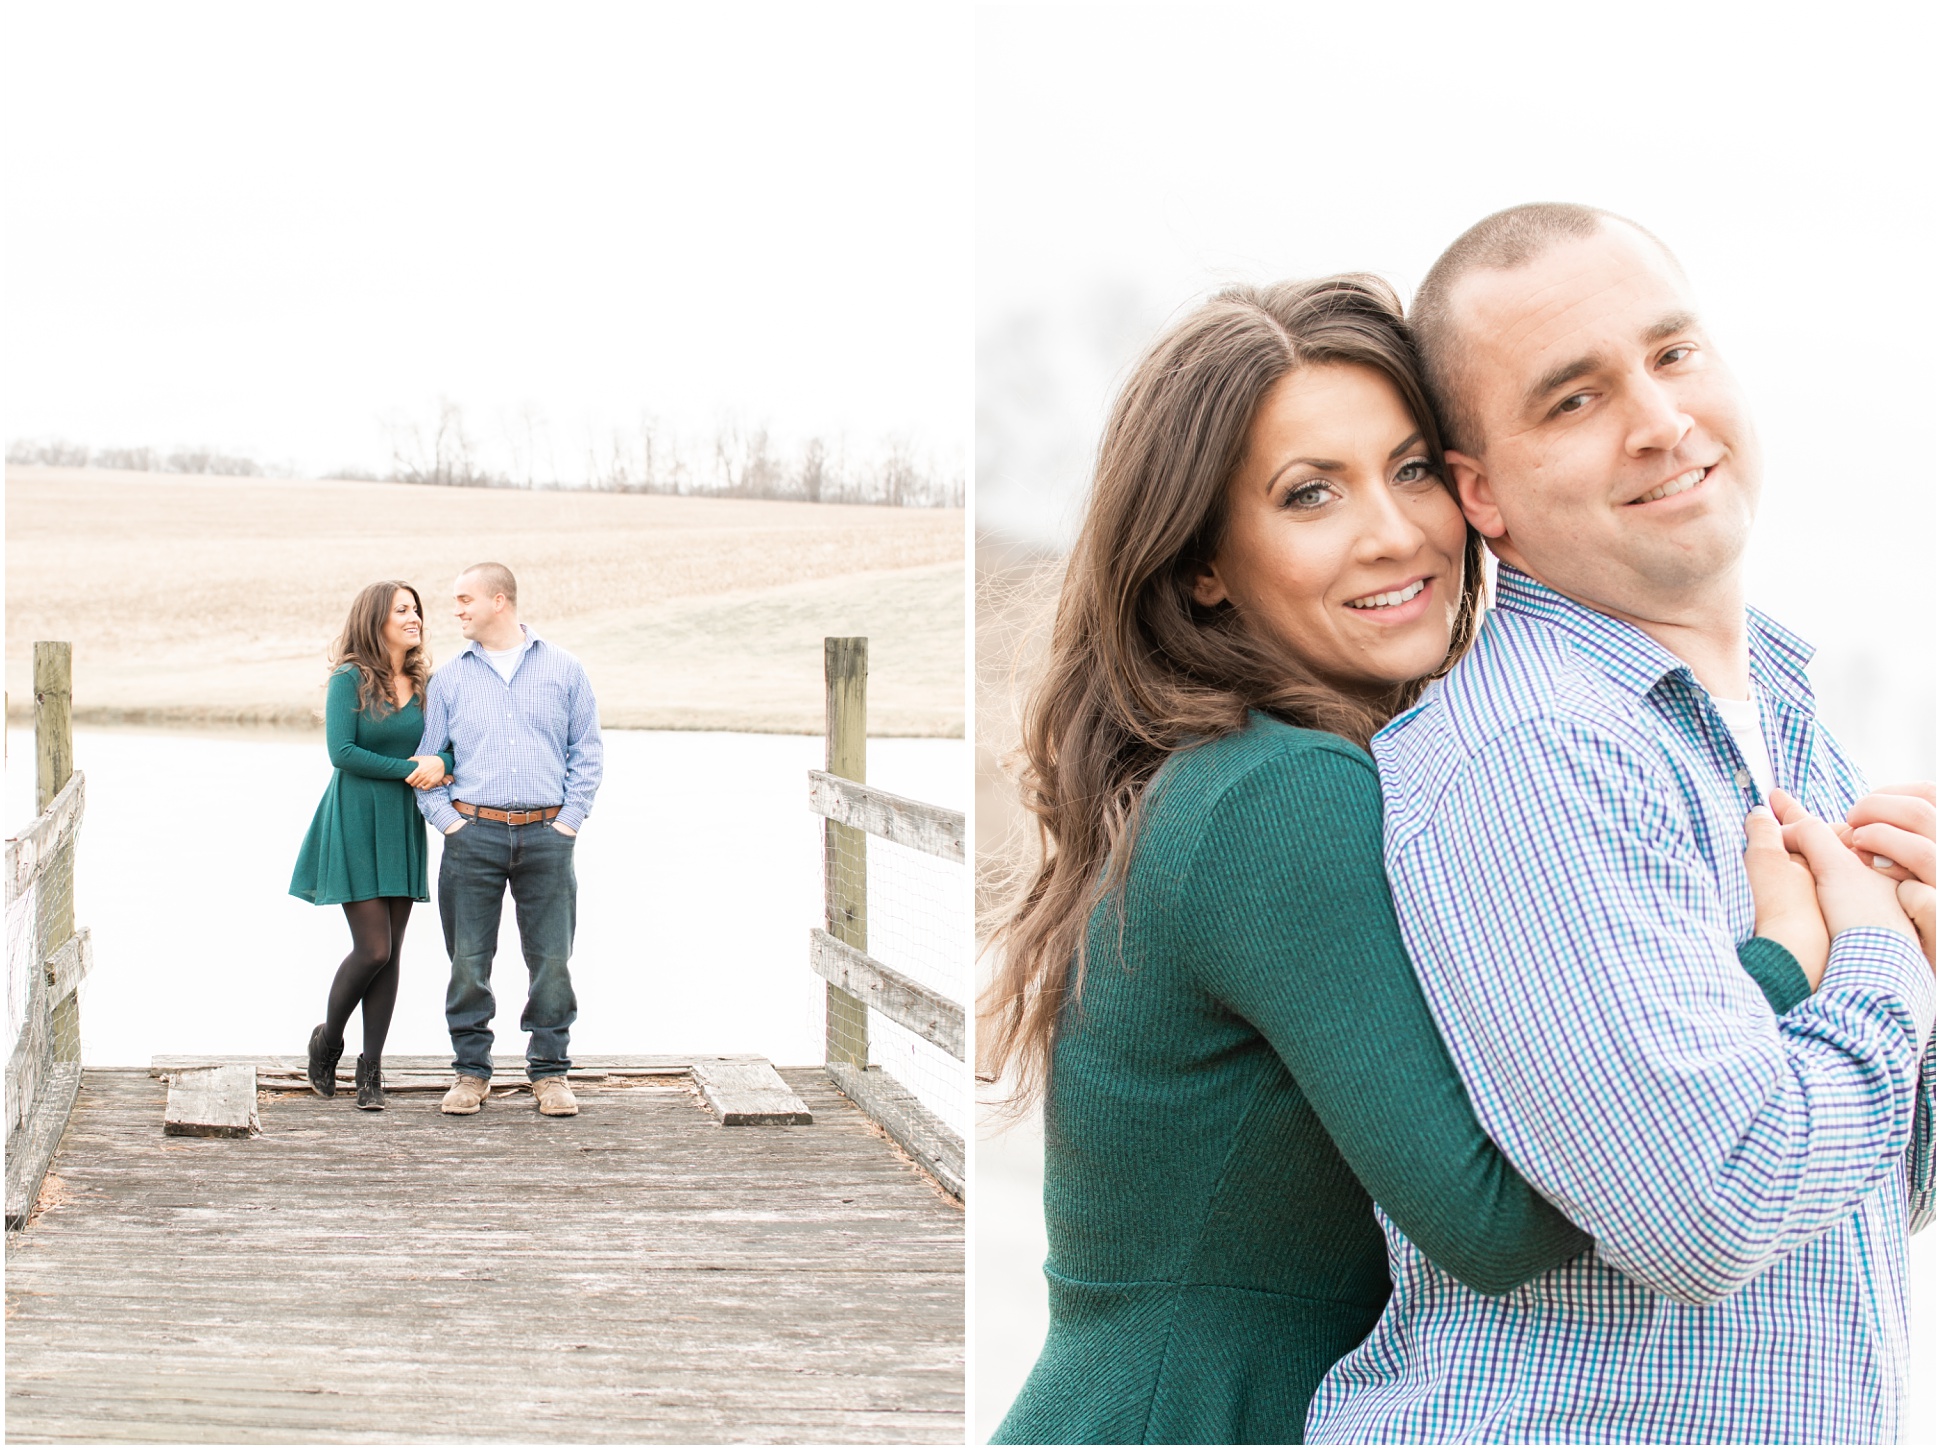 Two images of Valerie and Ryan by the pond and dock on the Heaps Family Farm